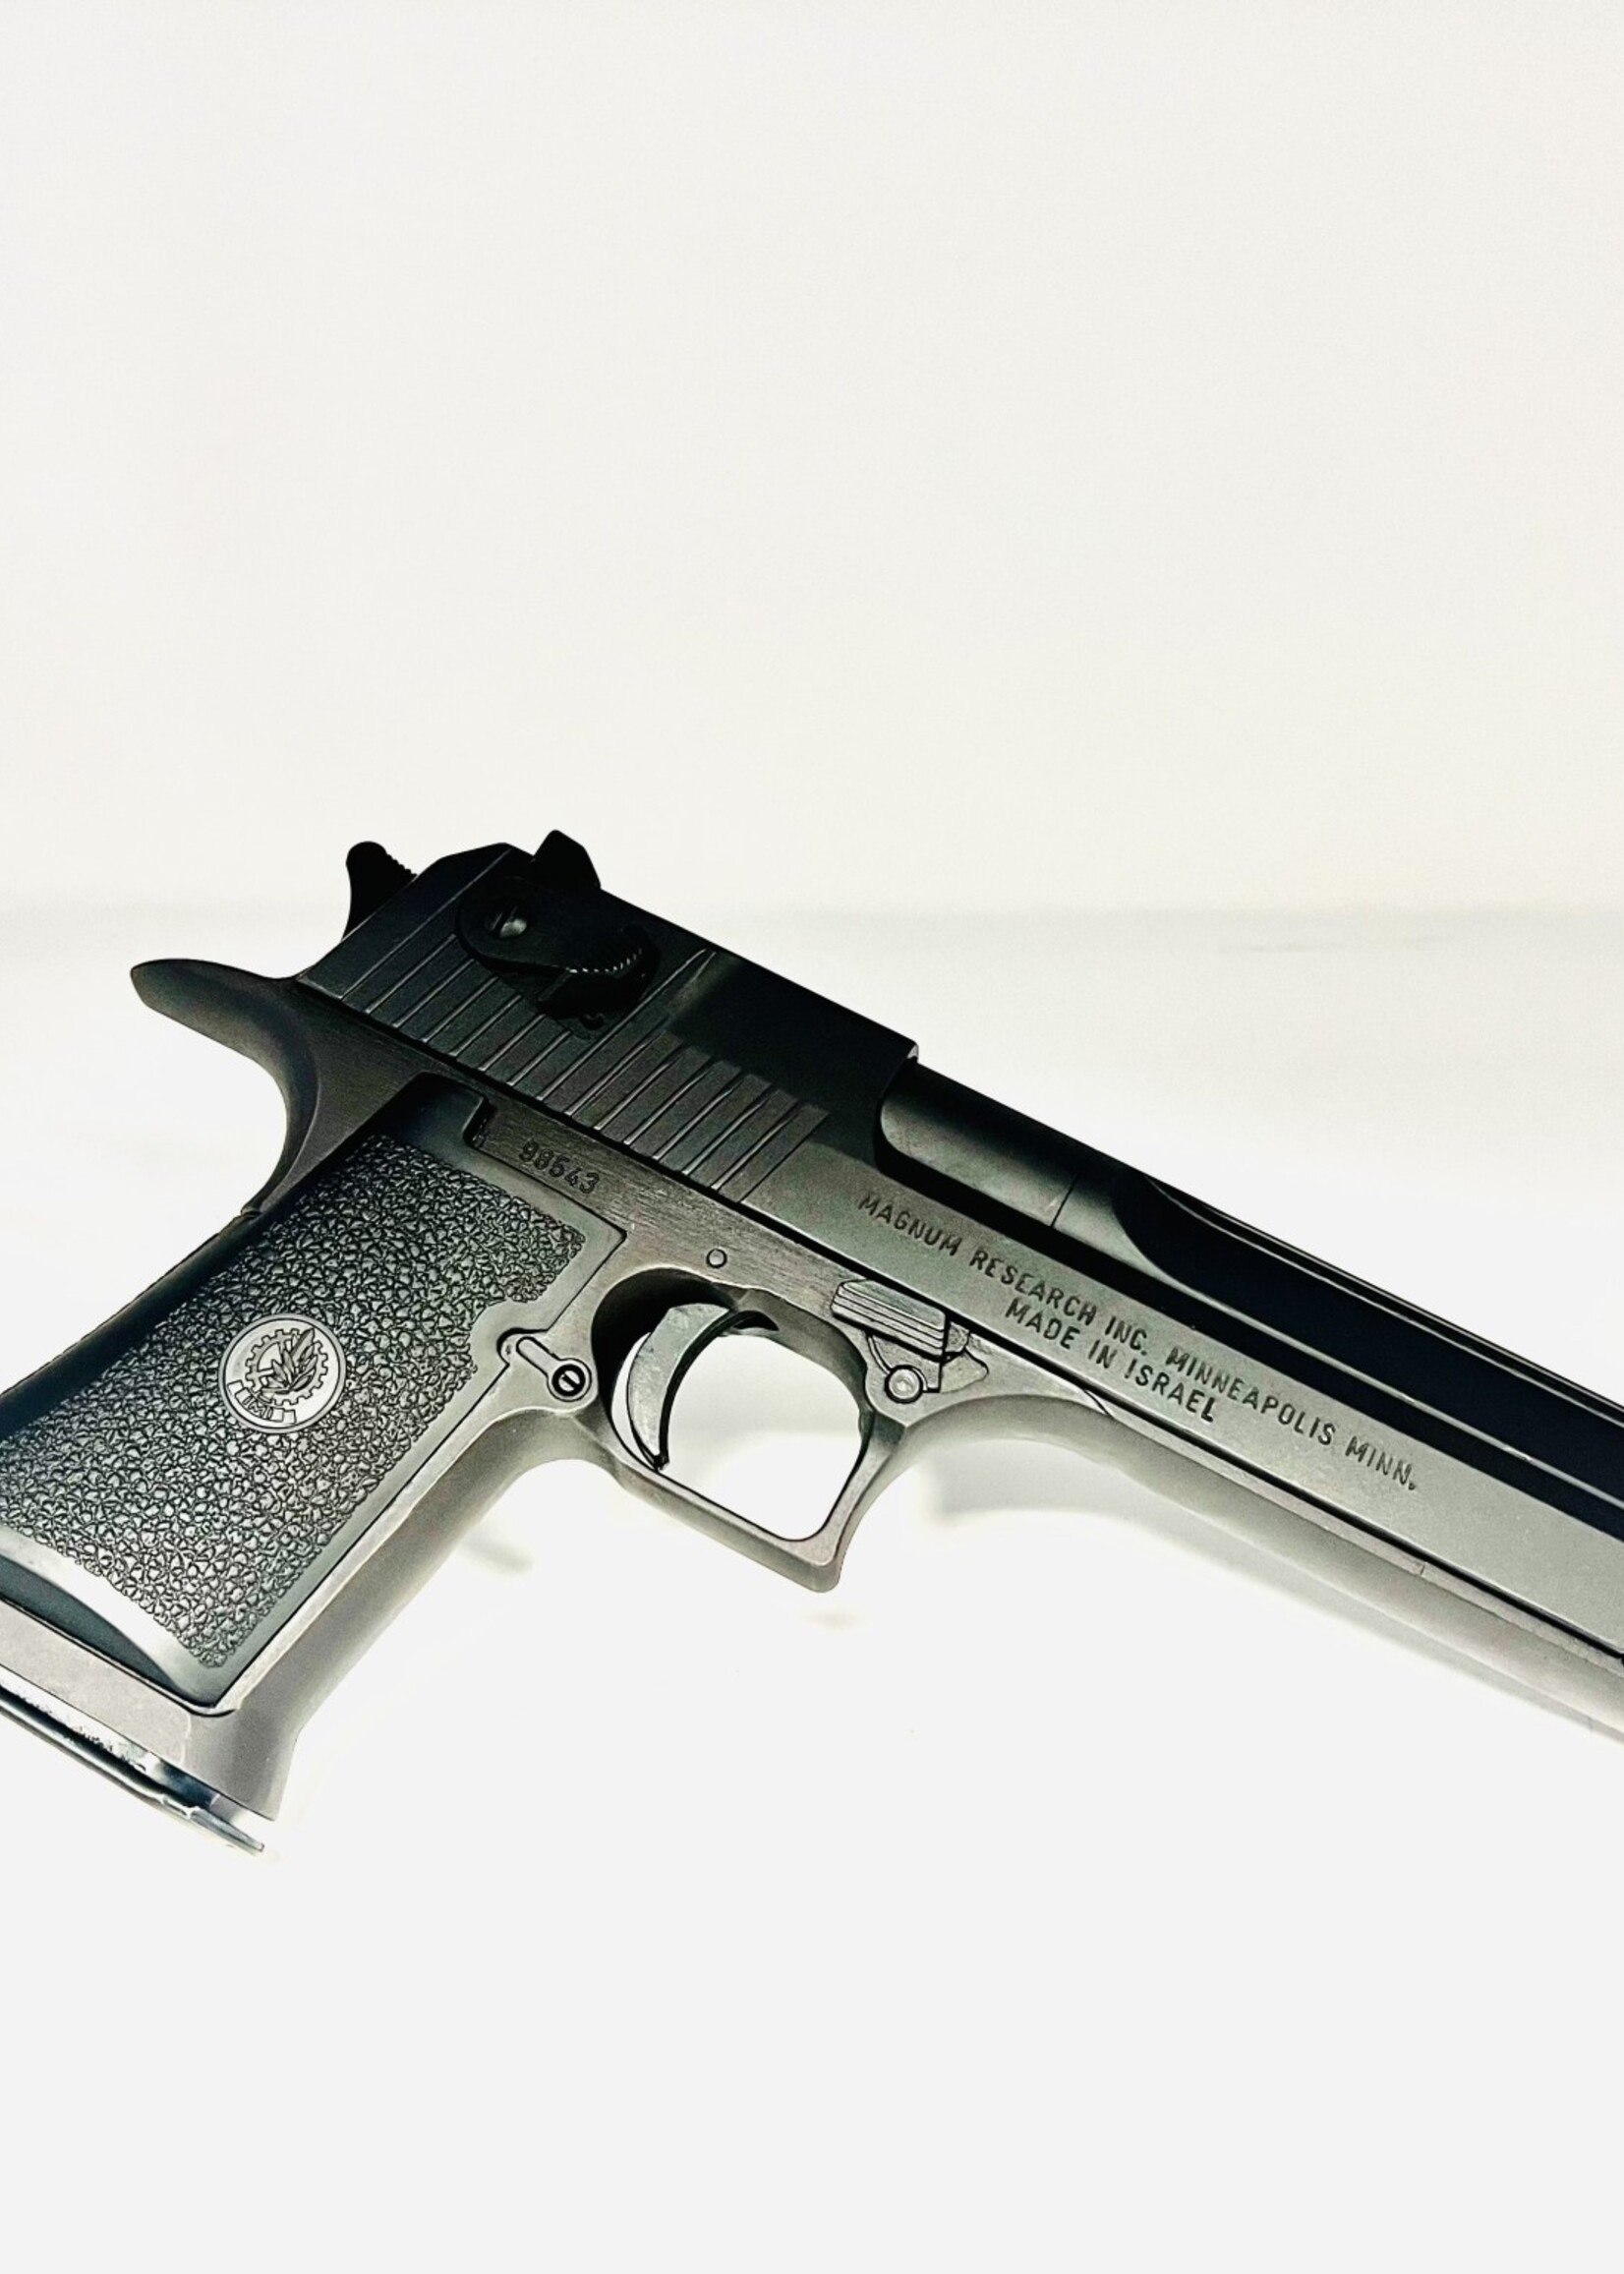 Magnum Research (CONS) Magnum Research Desert Eagle .41/.44 Magnum Pistol Israel Military Industries Made in Israel